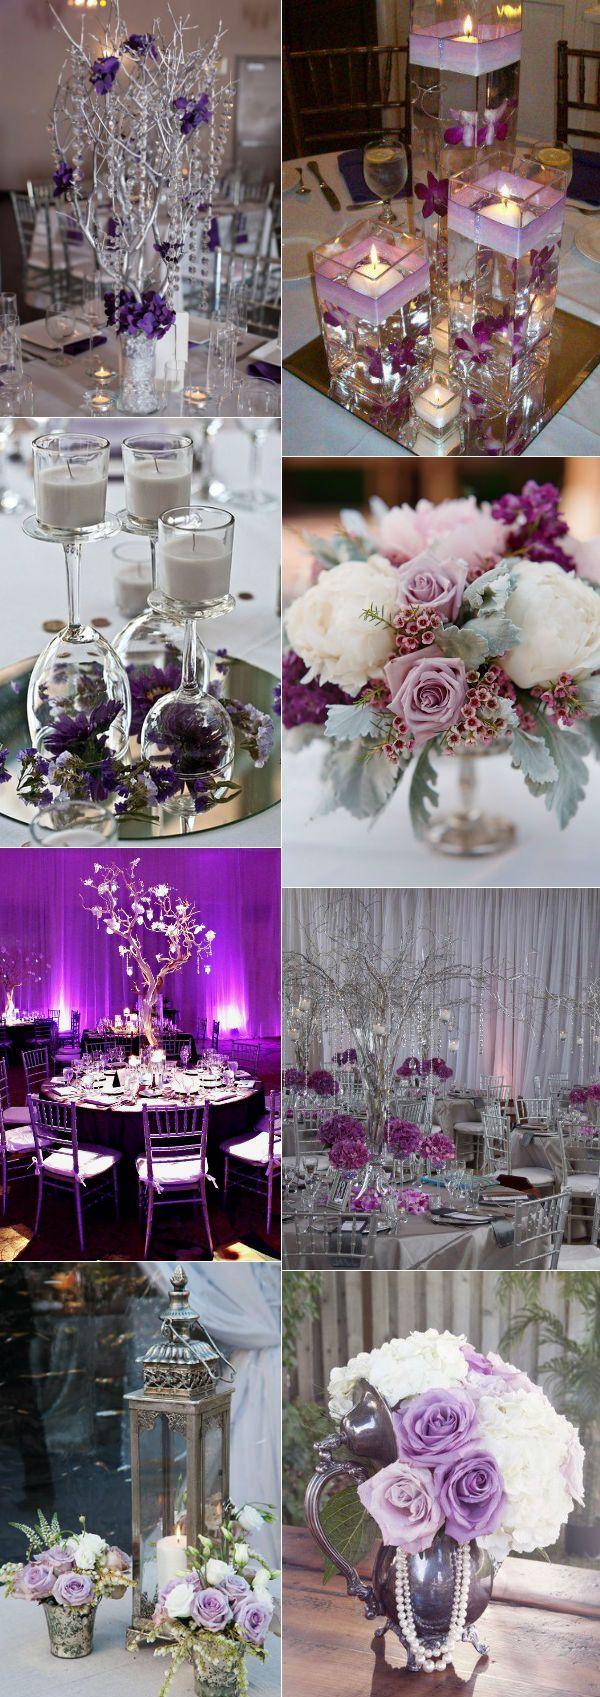 Wedding - Stunning Wedding Color Ideas In Shades Of Purple And Silver